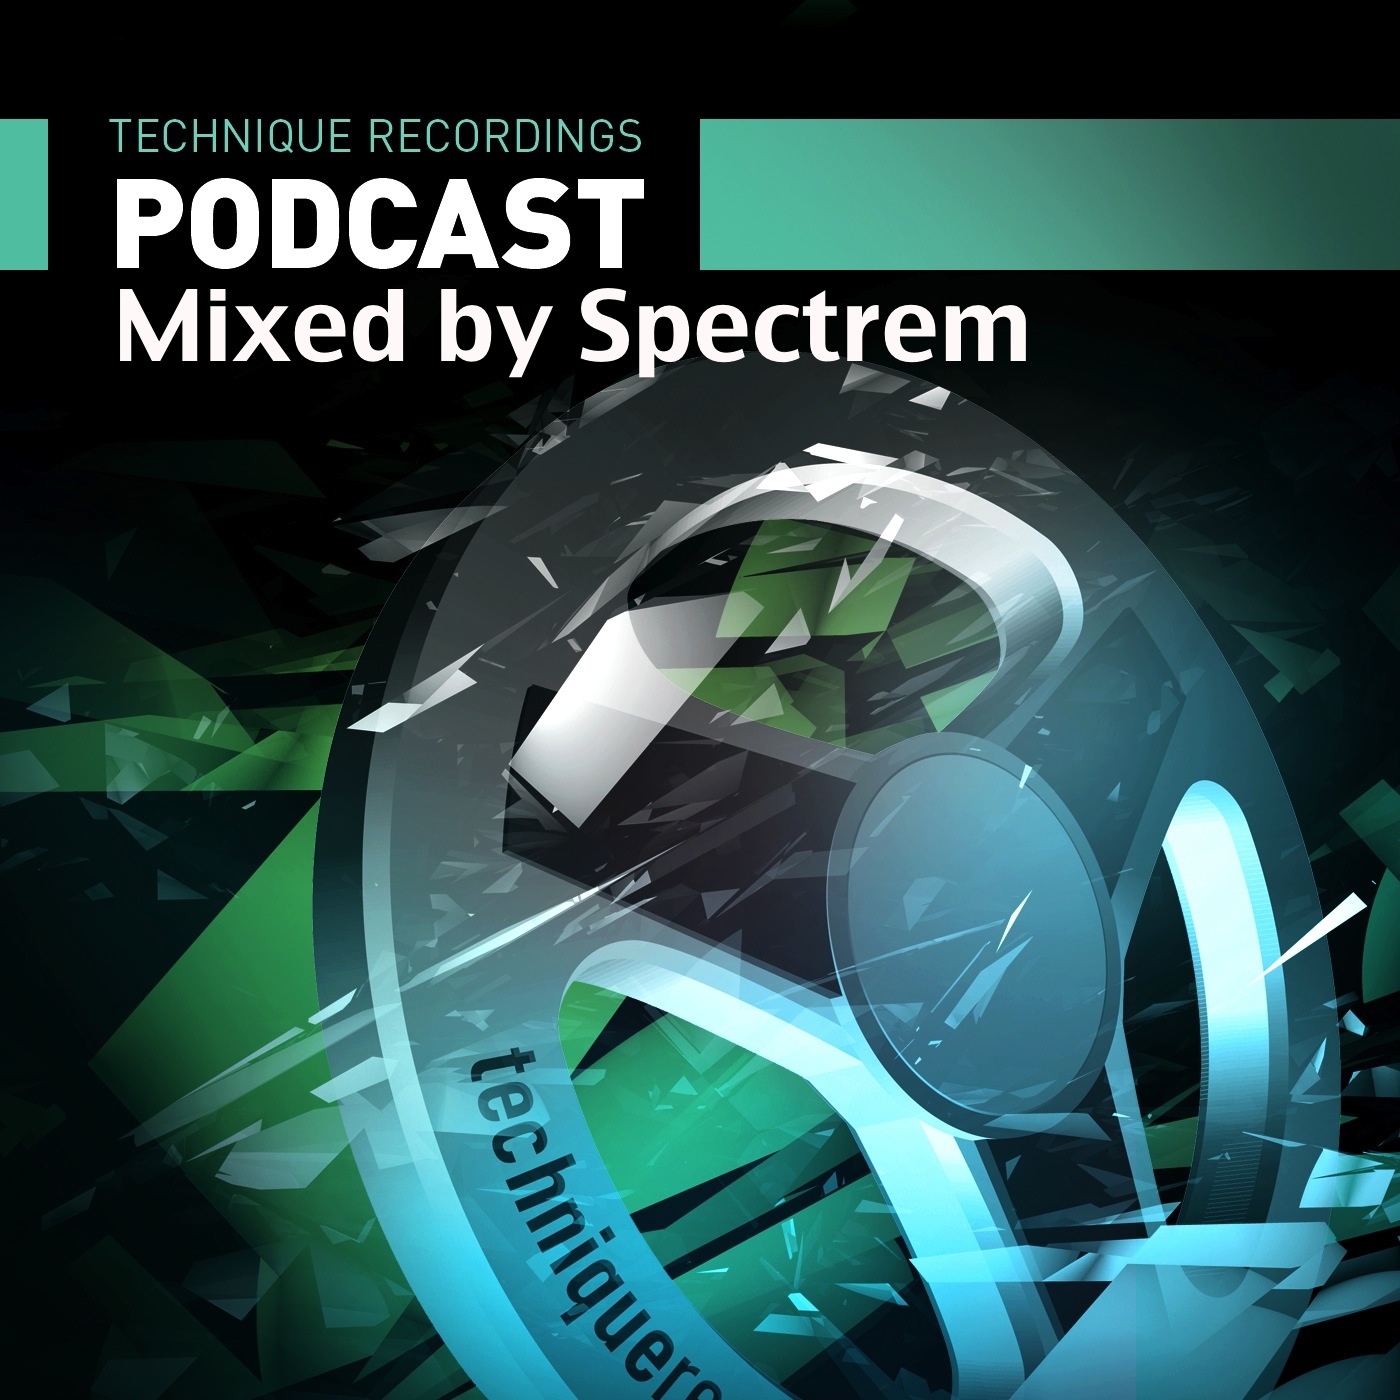 Episode 49 - March 2016 - Technique Podcast - Mixed By Spectrem